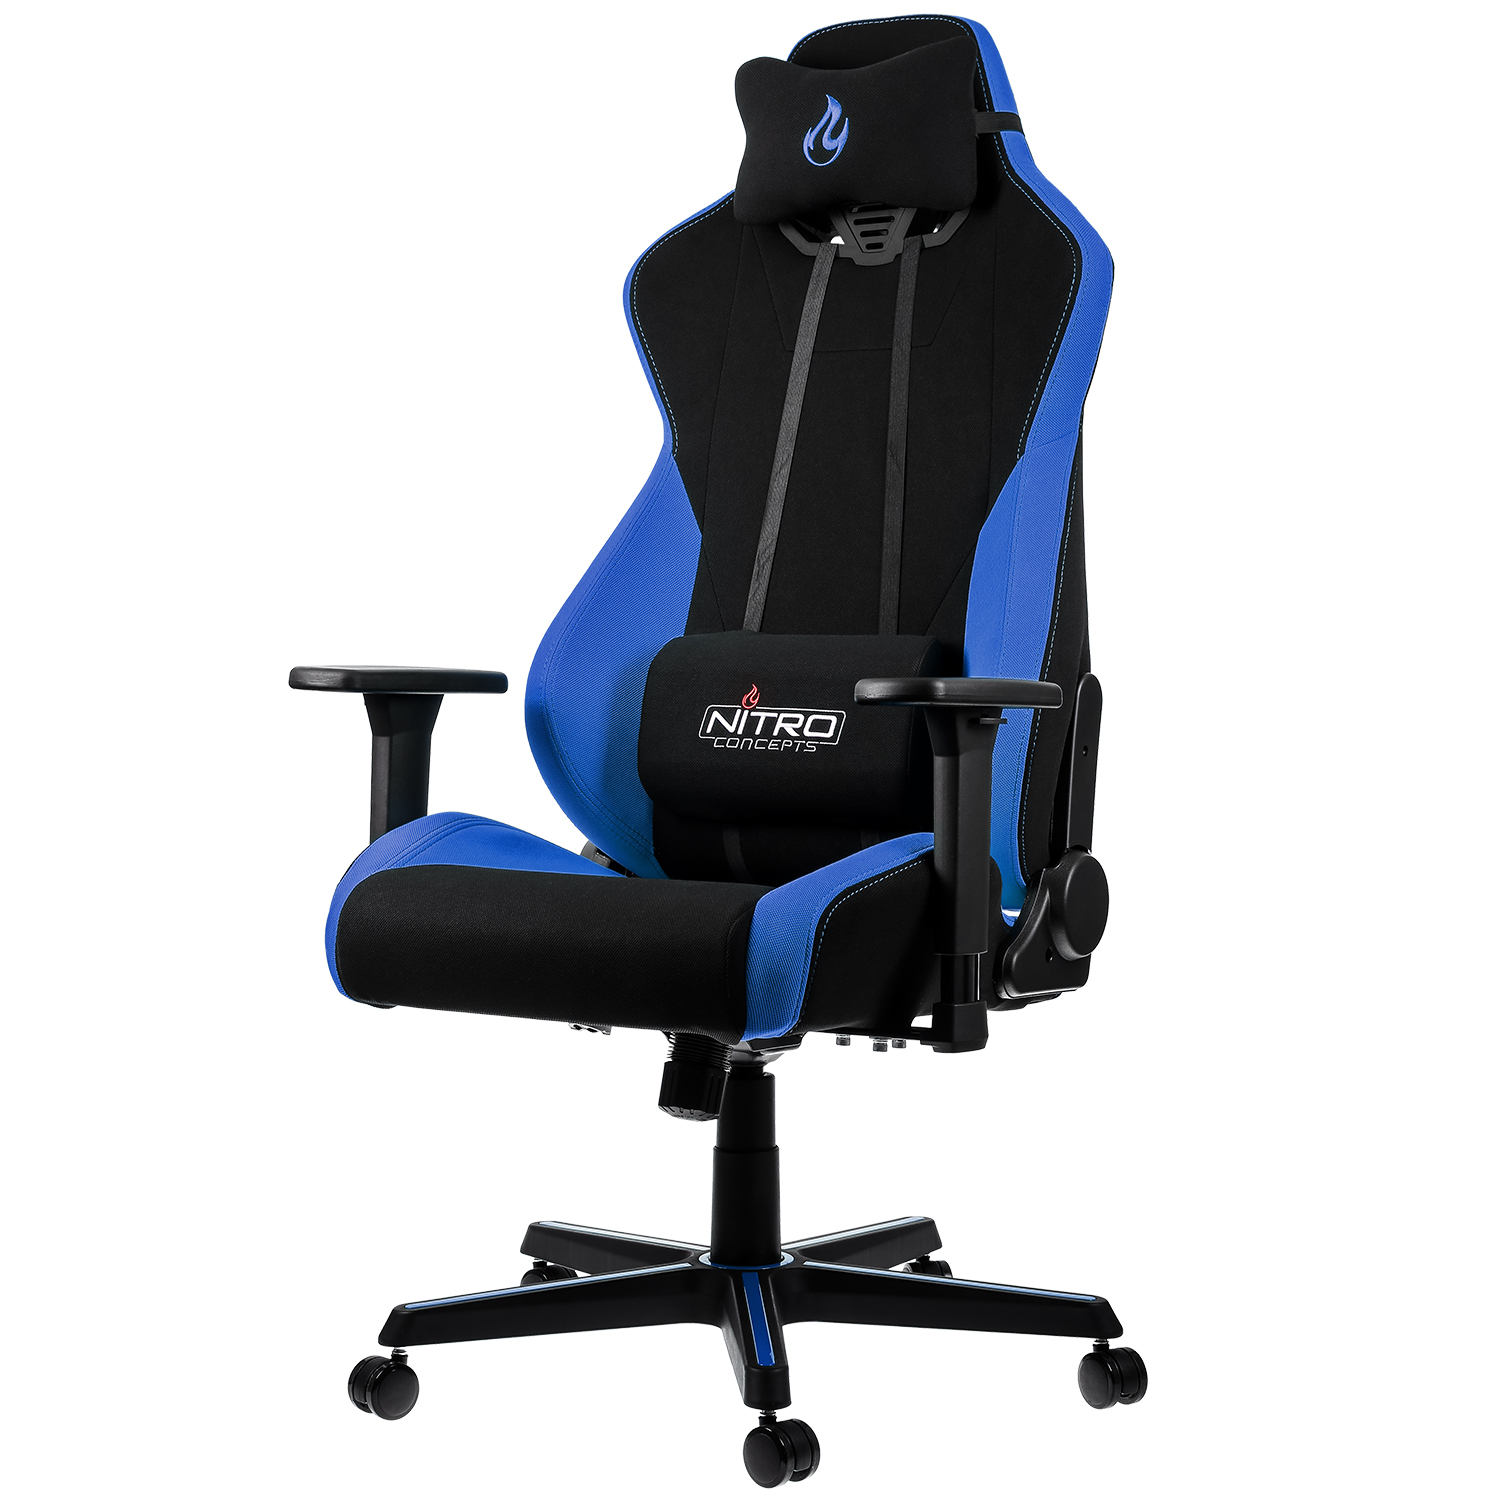 Nitro Concepts - S300 Gaming Chair - Galactic Blue